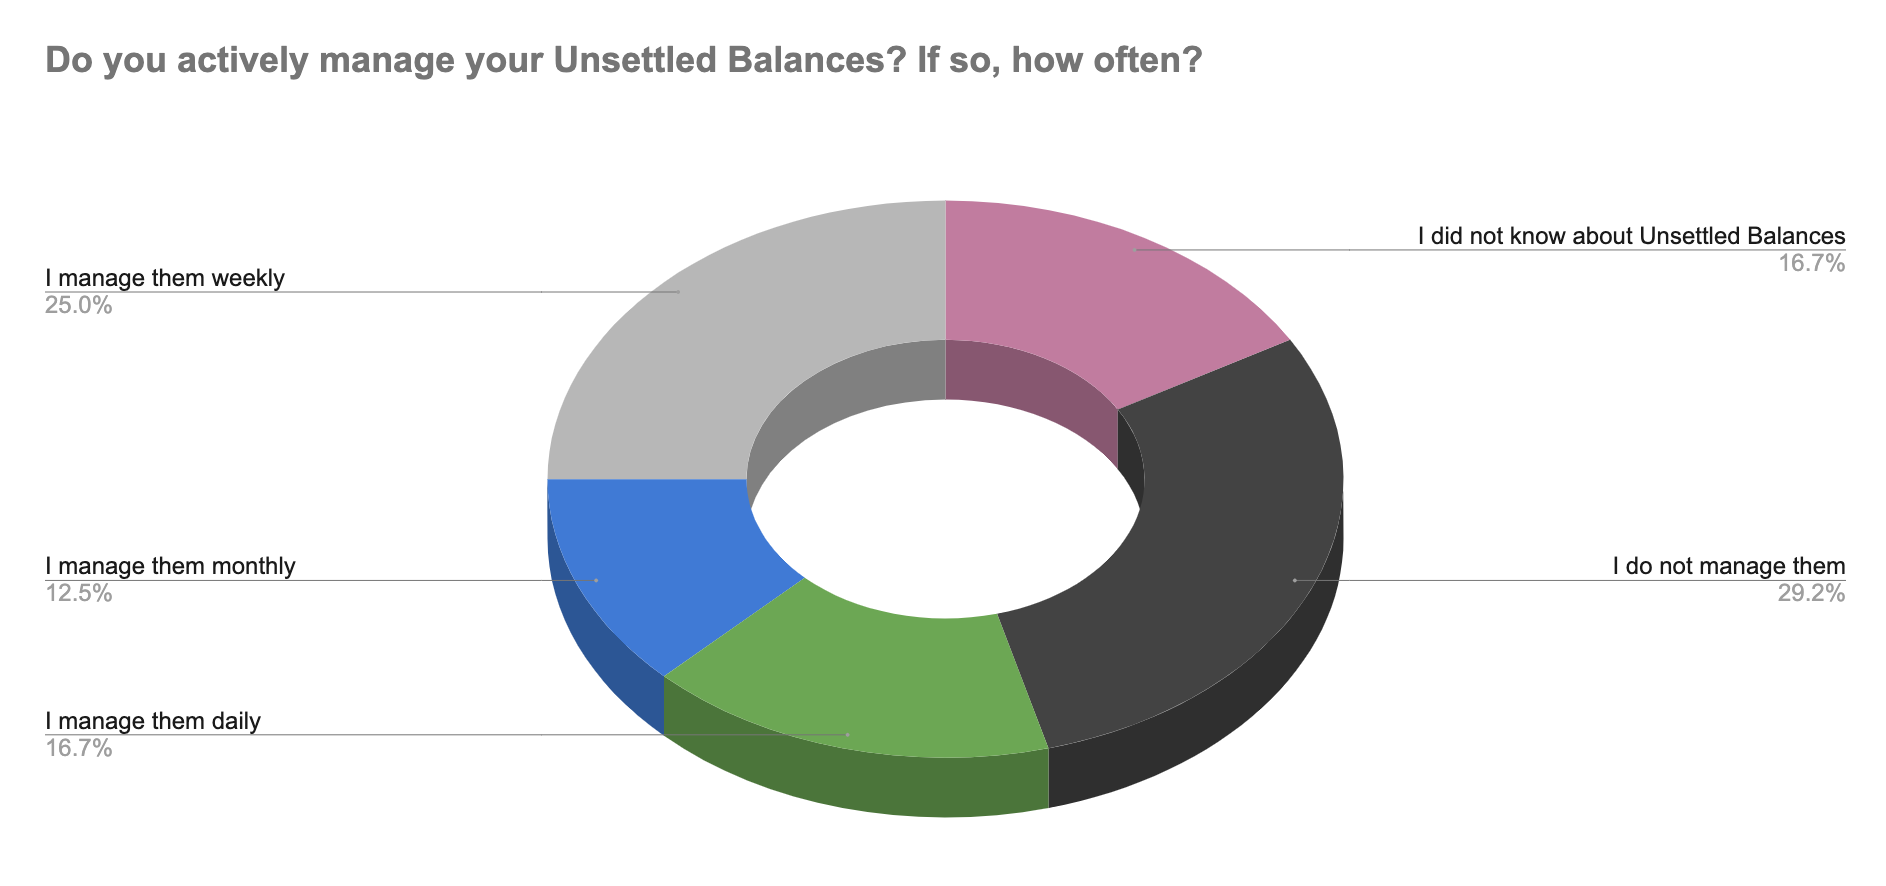 A chart showing how webinar attendees responded to a question about managing Unsettled Balances with Dealerware. 25% manage unsettled balances weekly; 12.5% manage them monthly; 16.7% manage them daily. Another 16.7% did not know about the feature, and about a third said they do not manage unsettled balances.